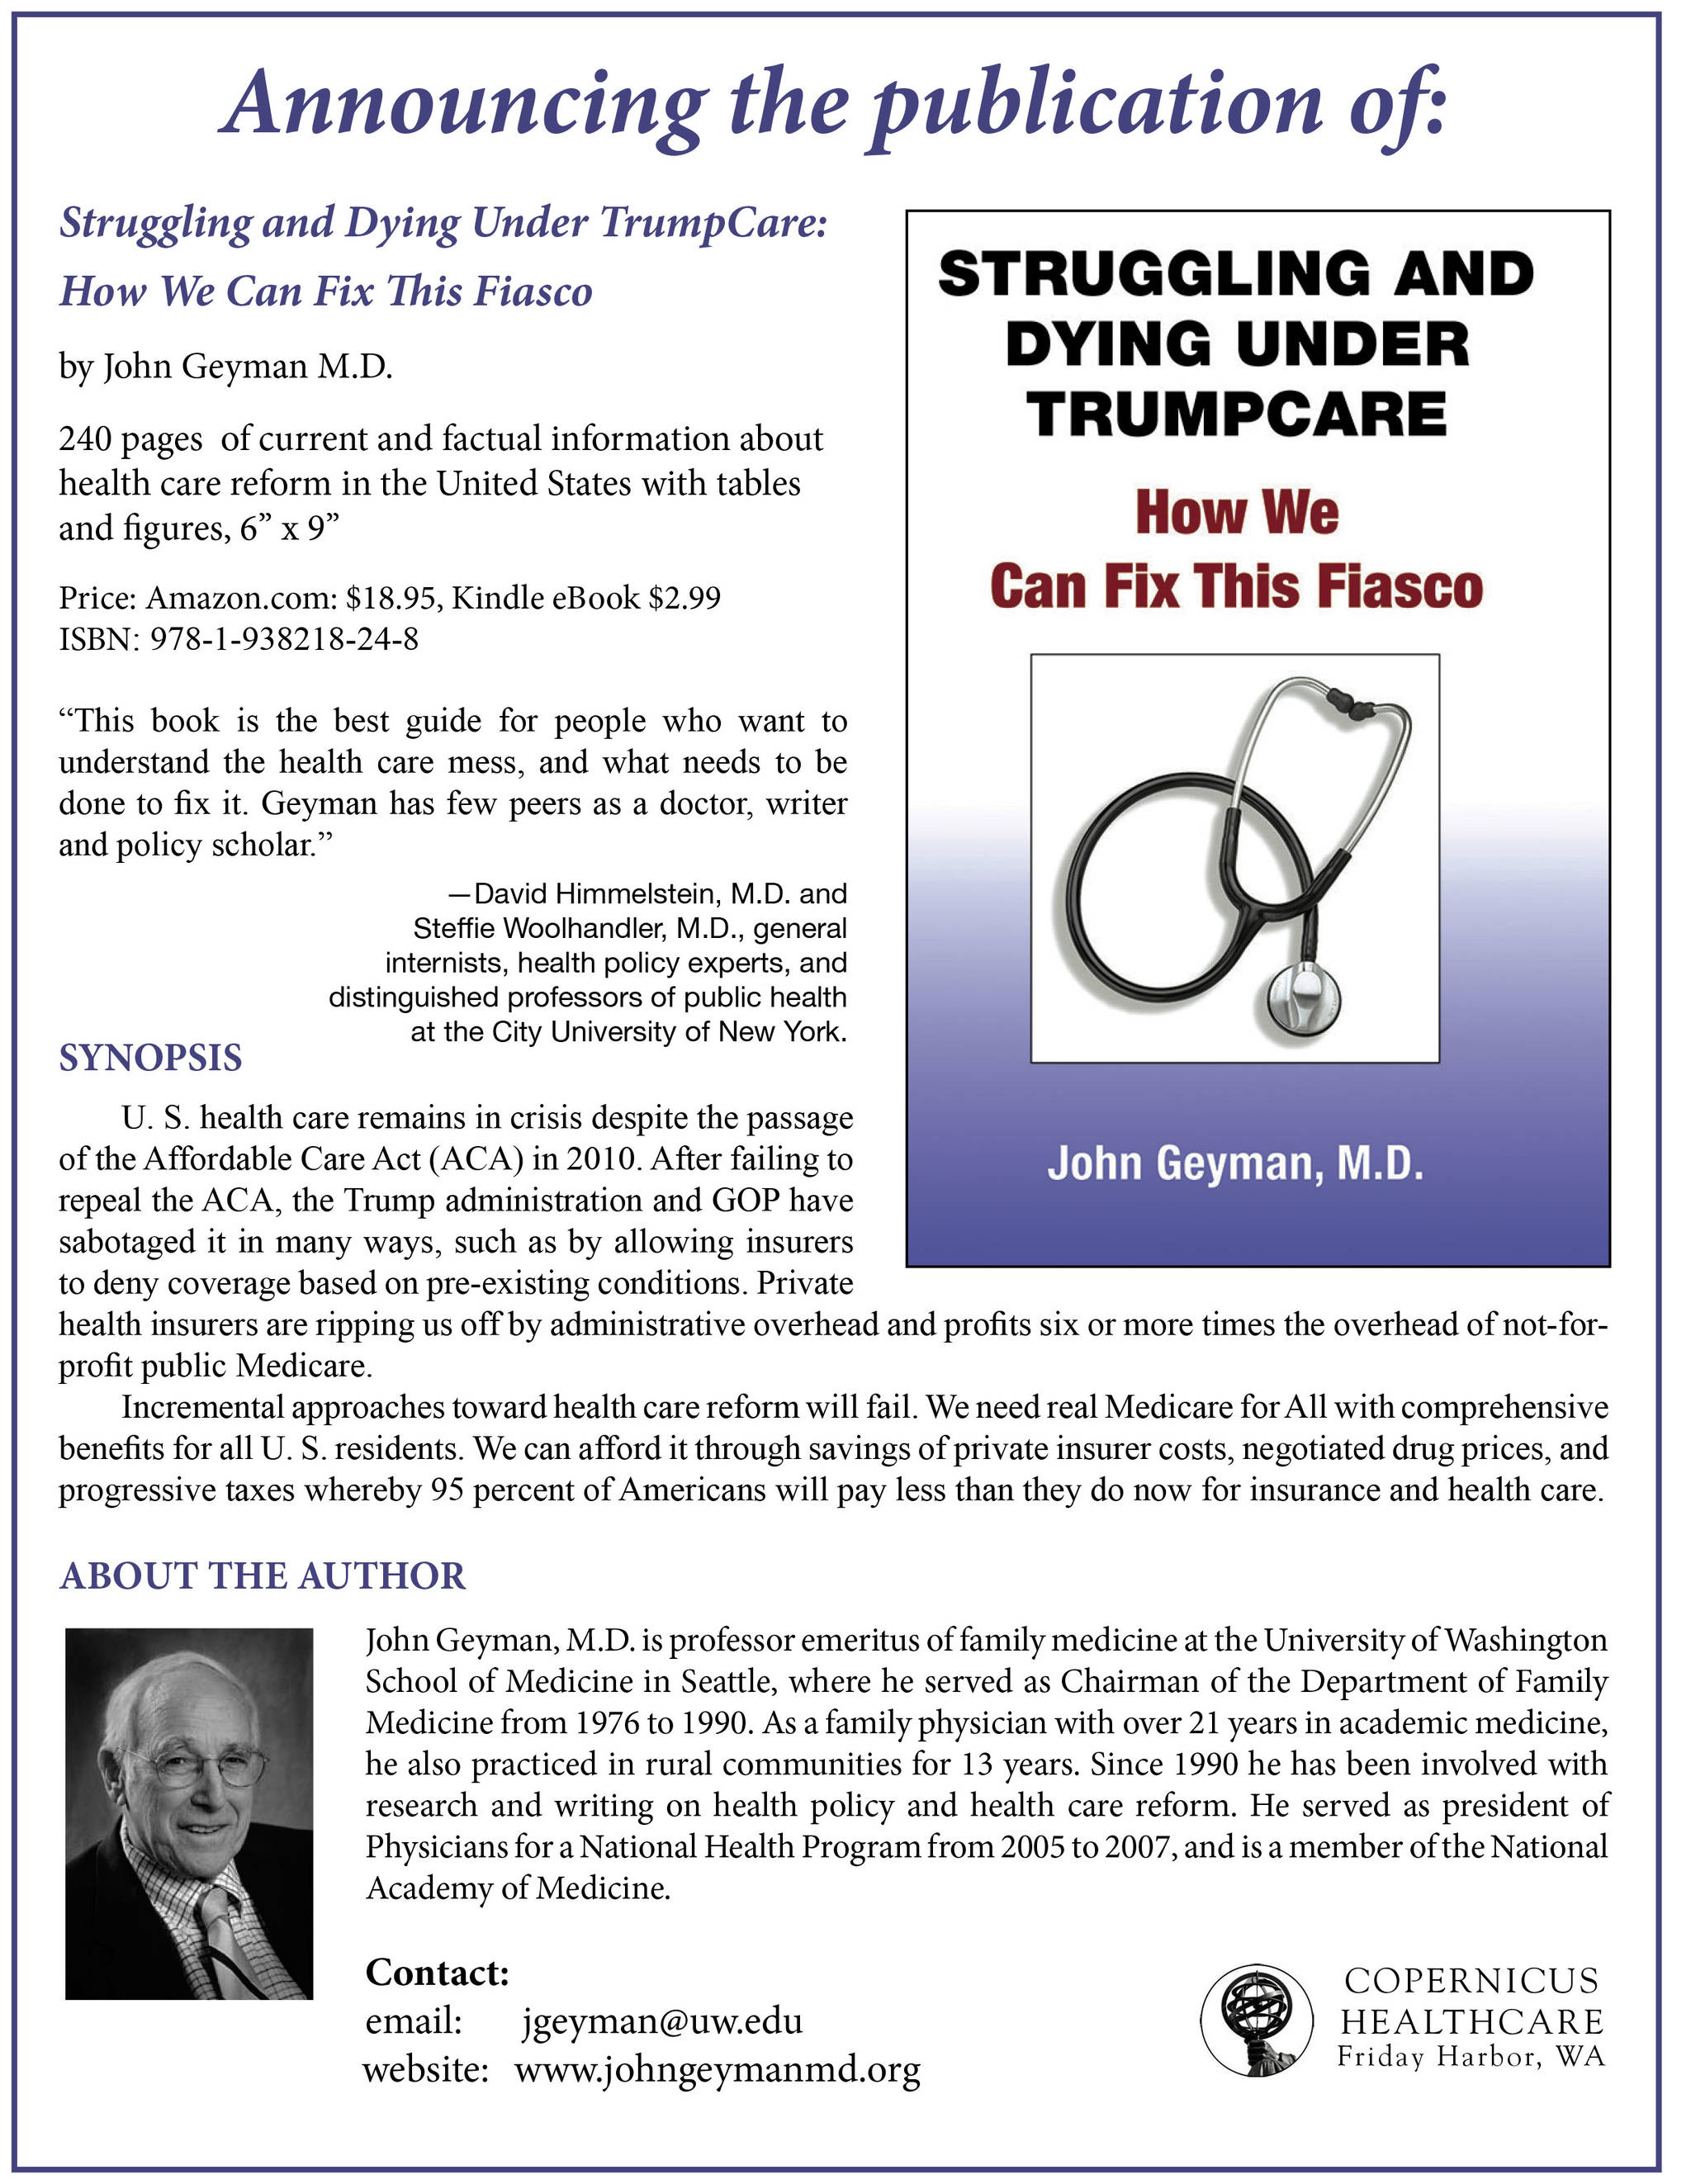 John Geyman, M.D. announces publication of: Struggling and Dying Under Trumpcare: How We Can Fix This Fiasco